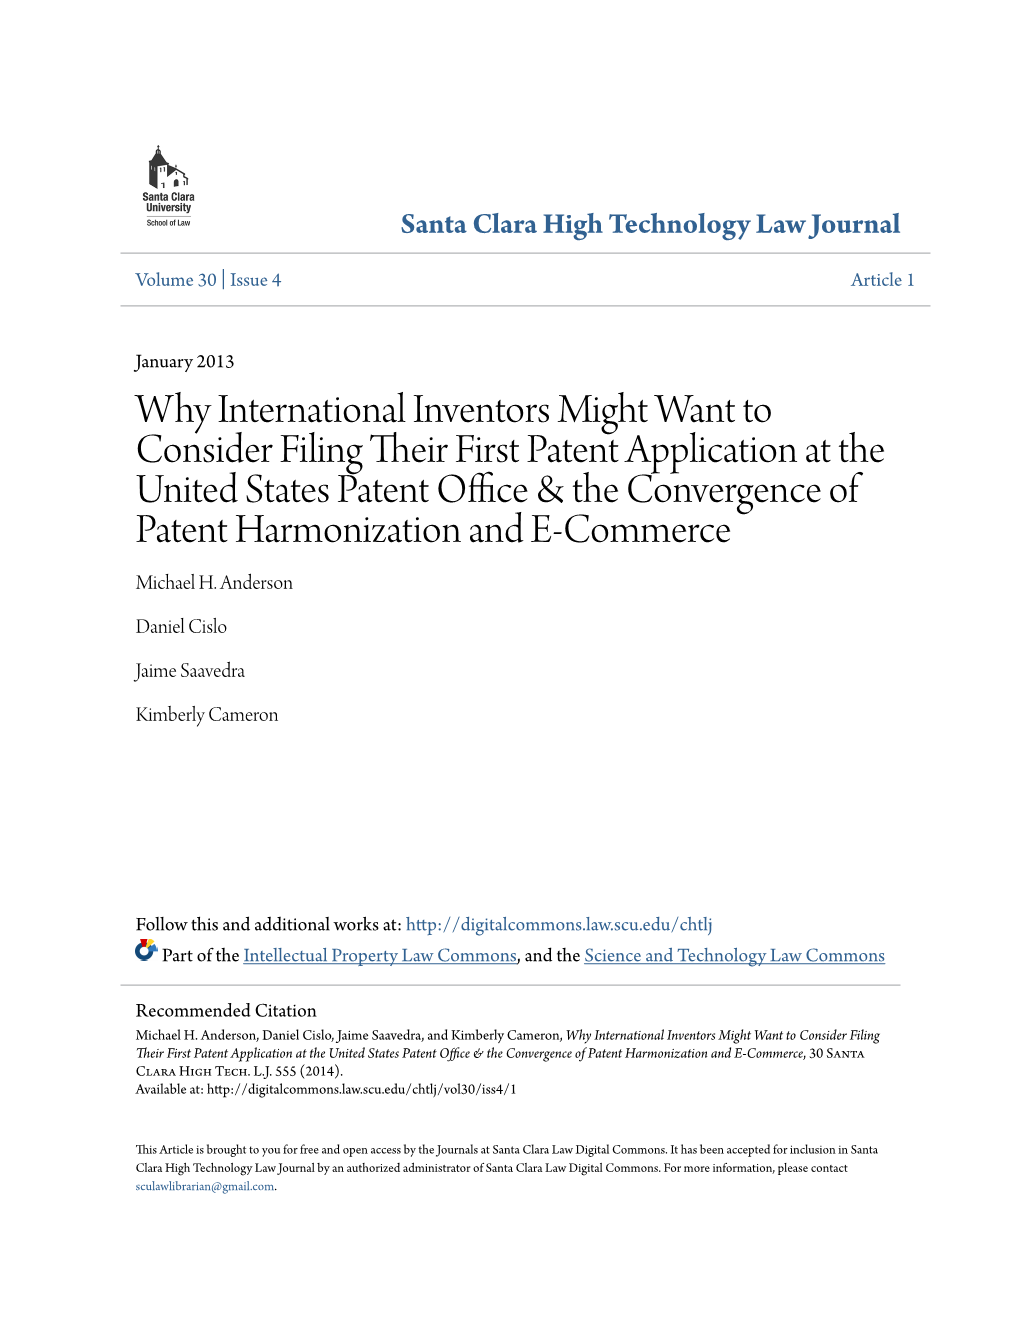 Why International Inventors Might Want to Consider Filing Their First Patent Application at the United States Patent Office &